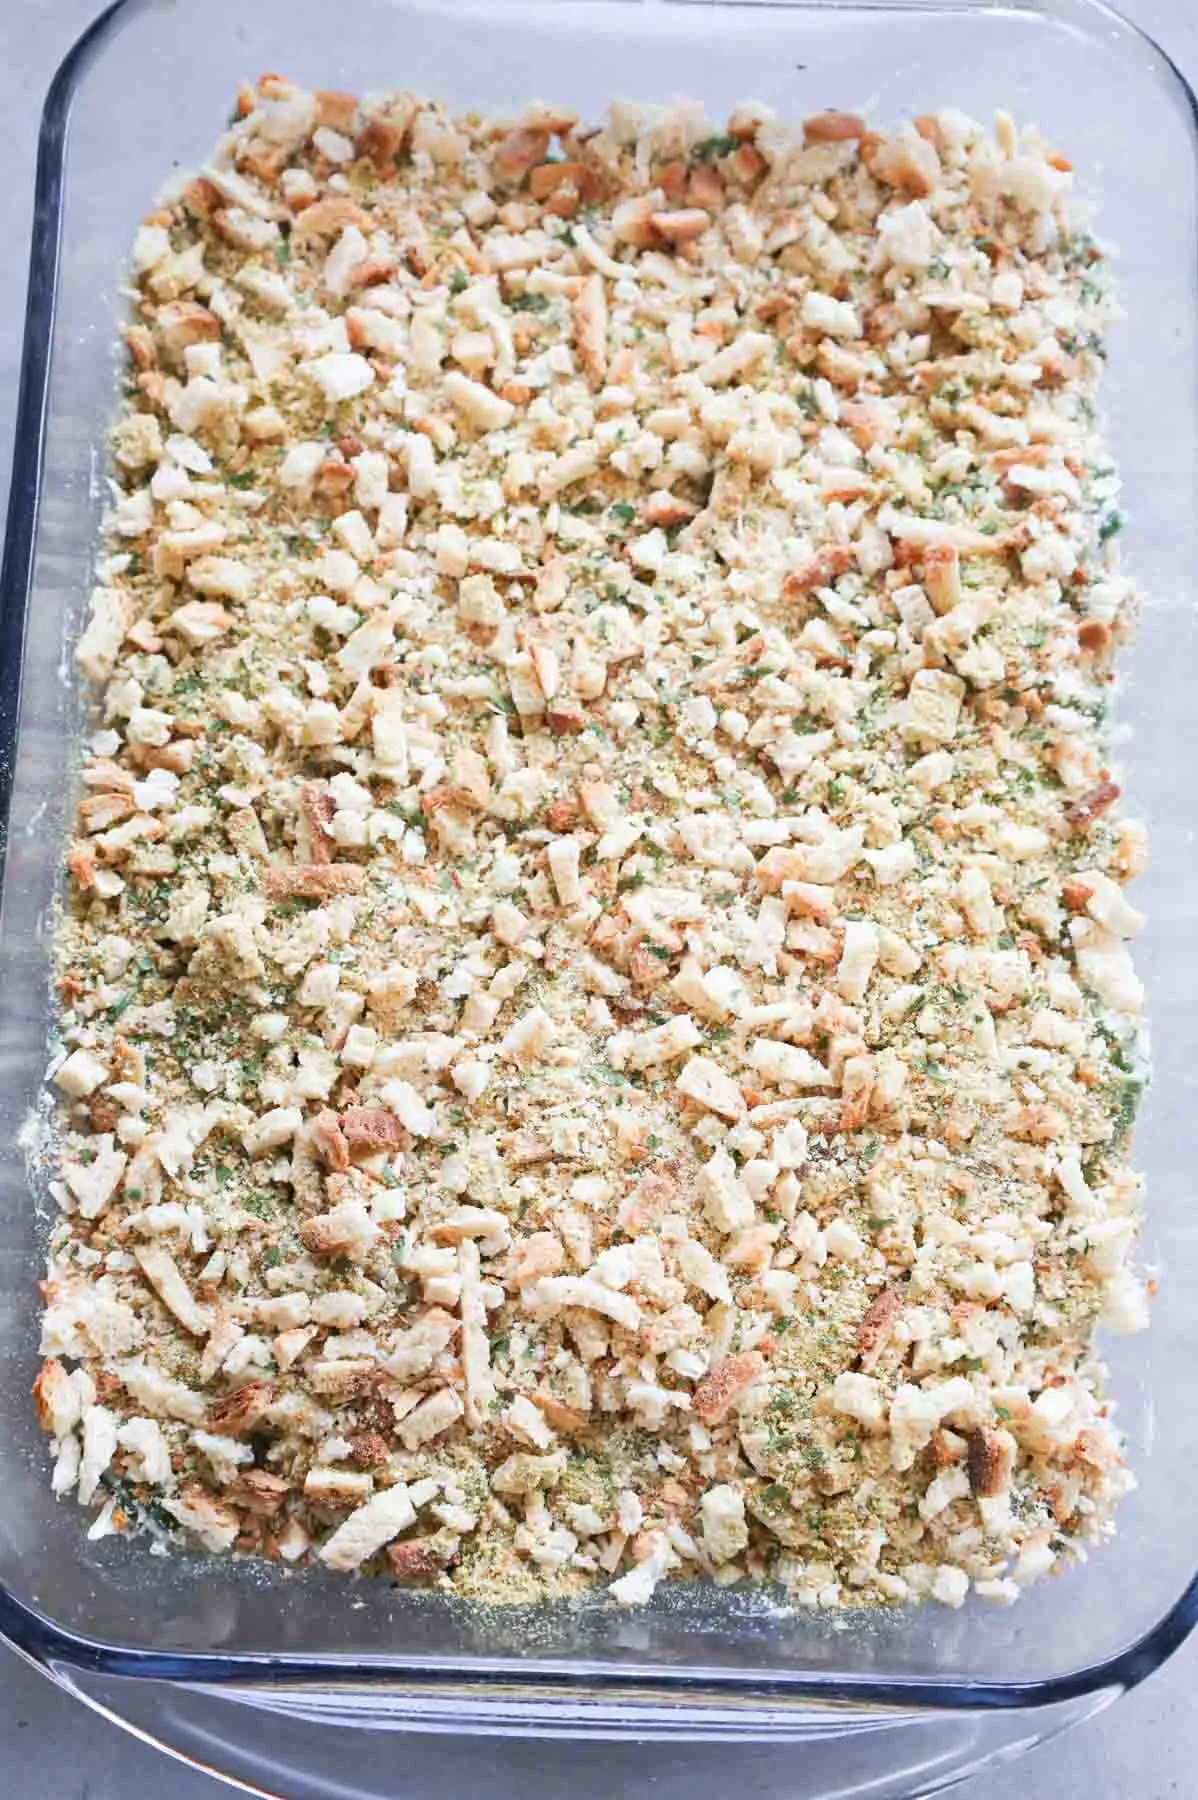 dry stove top stuffing mix on top of green bean casserole in a baking dish